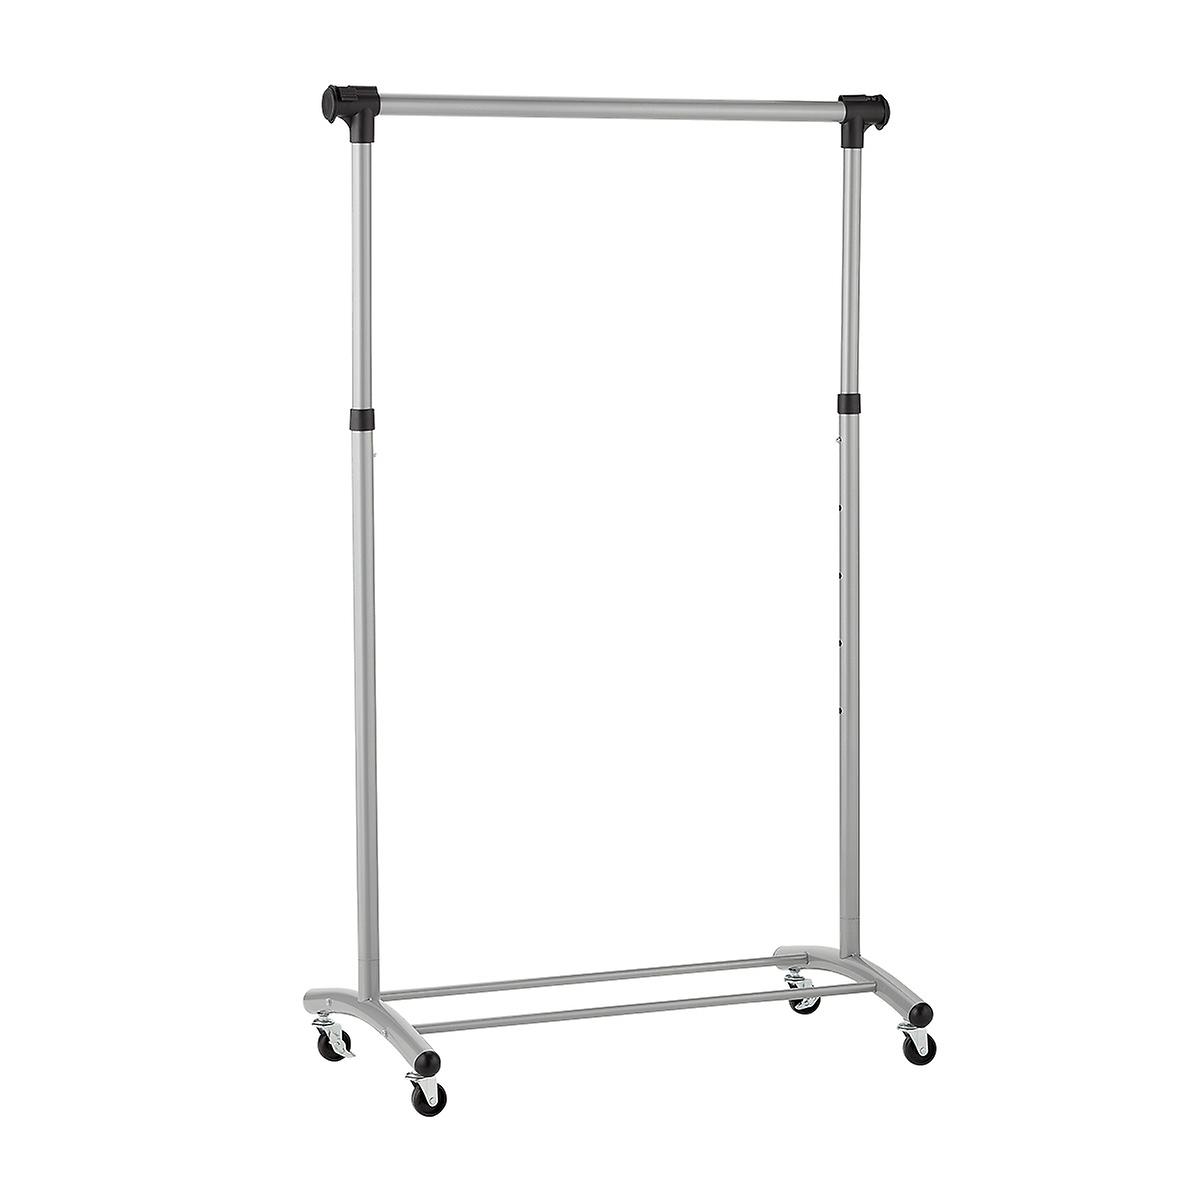 Basic Garment Rack | The Container Store